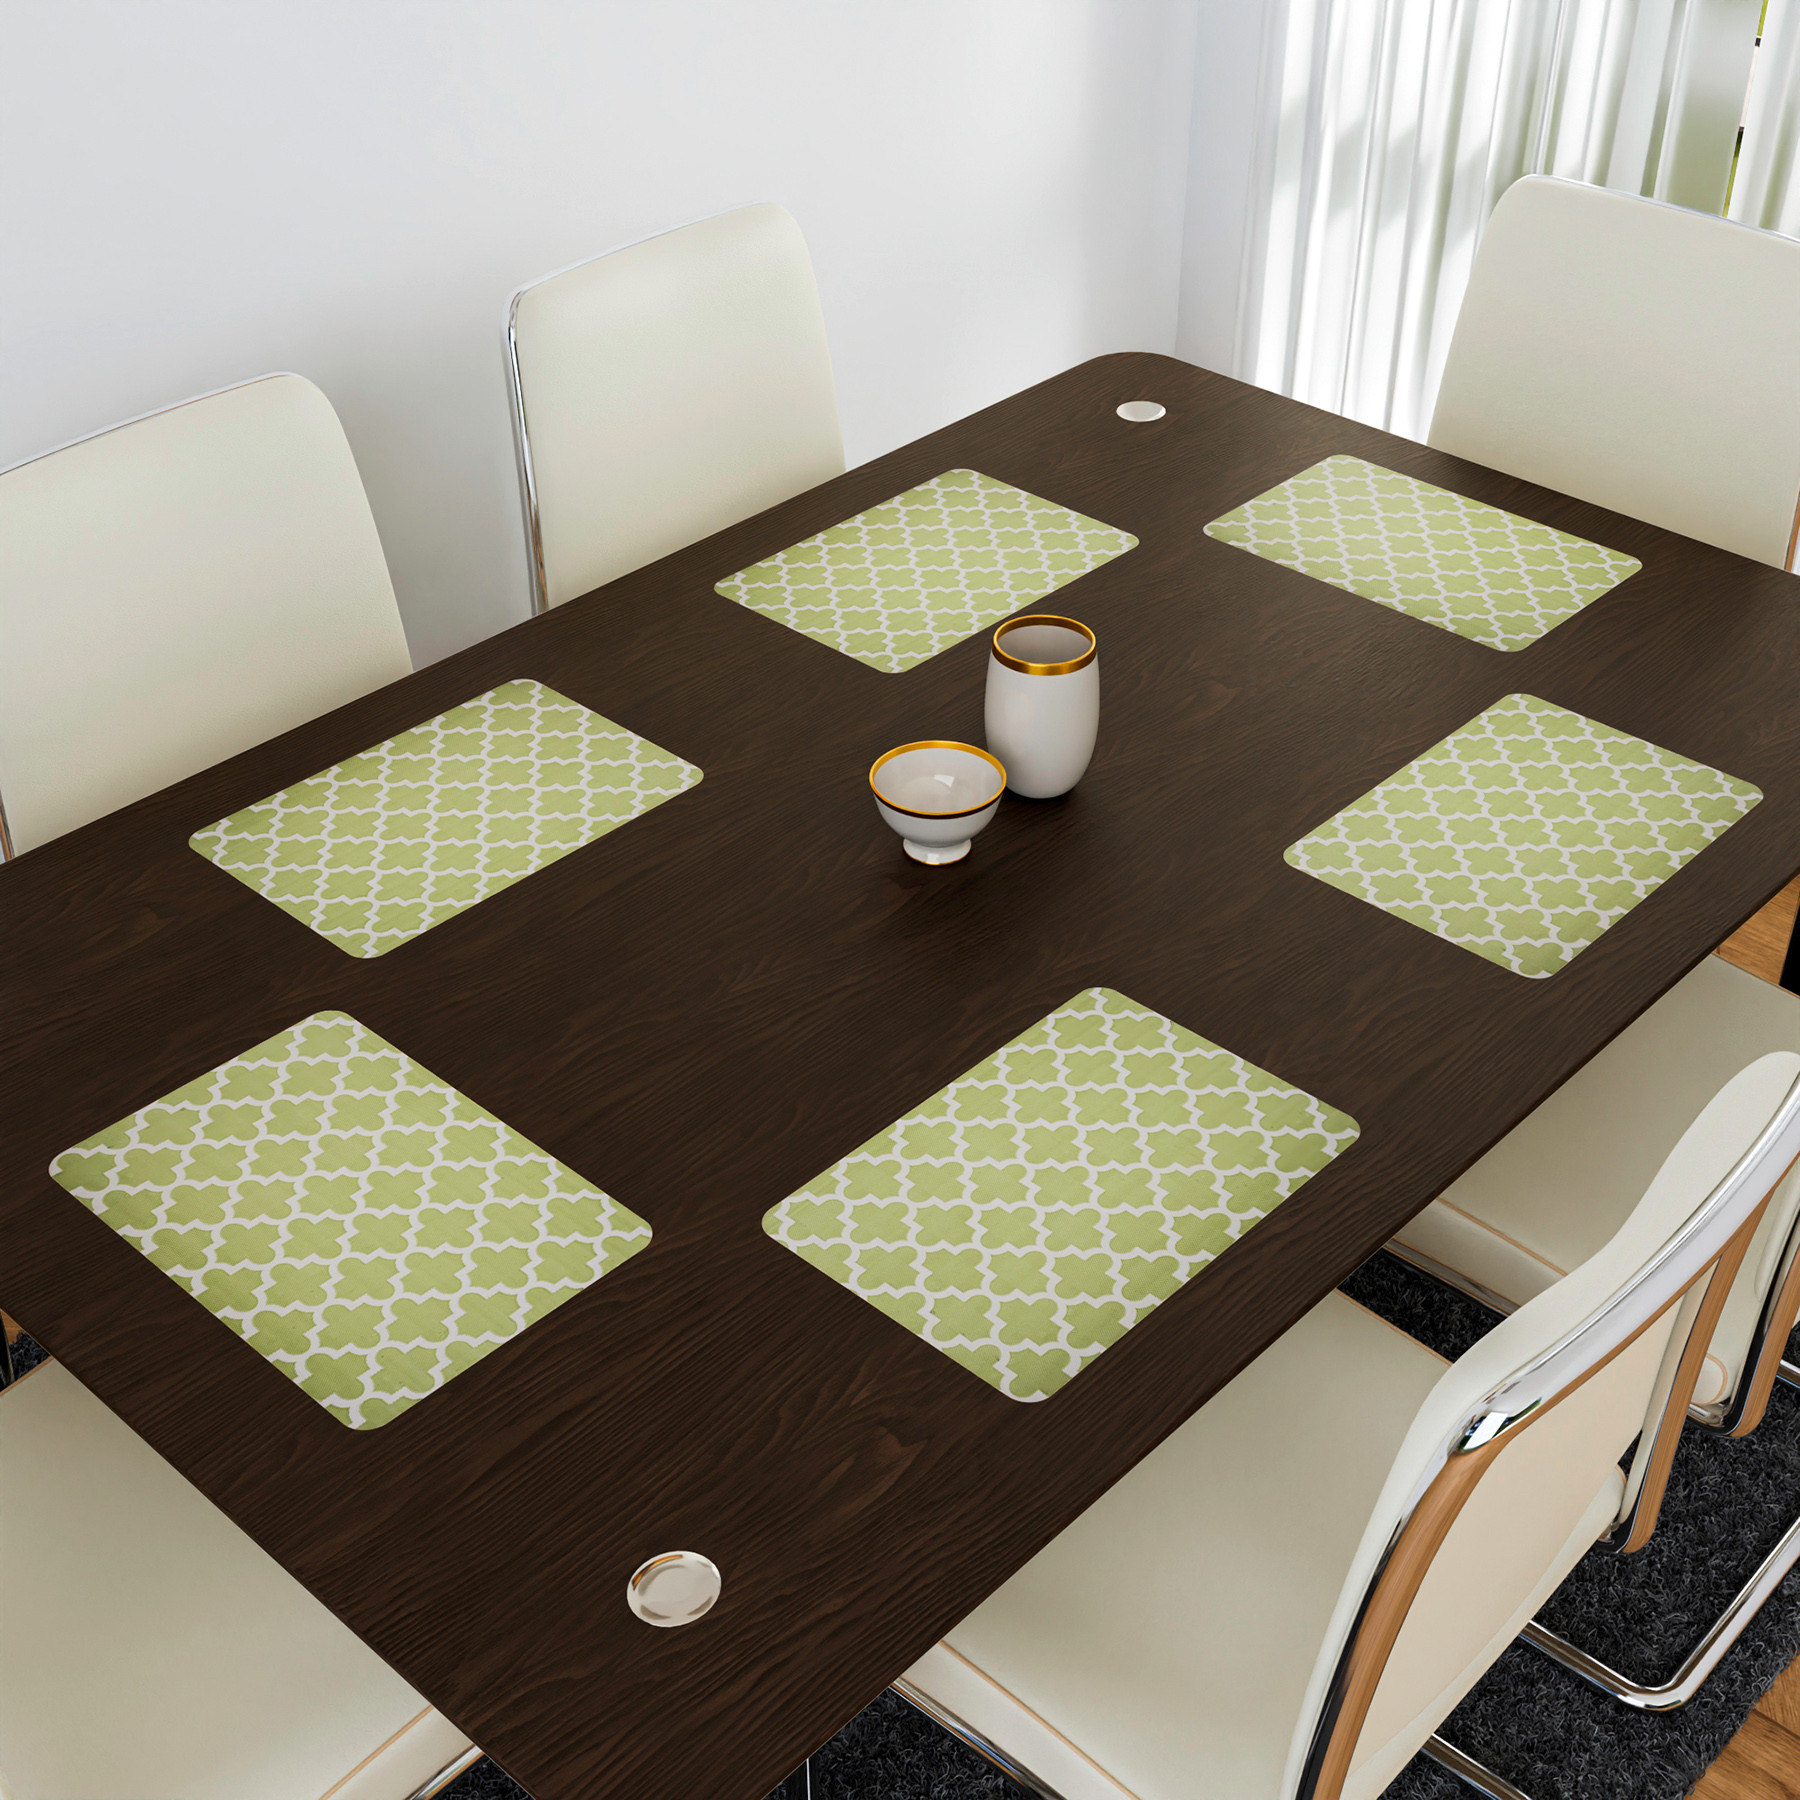 Kuber Industries Placemat | Placemats for Dining Room | Anti-Slip Table Mat Set | Placemats for Kitchen Table | Dining Table Placemats | Hexagon-Design Placemat | 6 Piece Set | Green